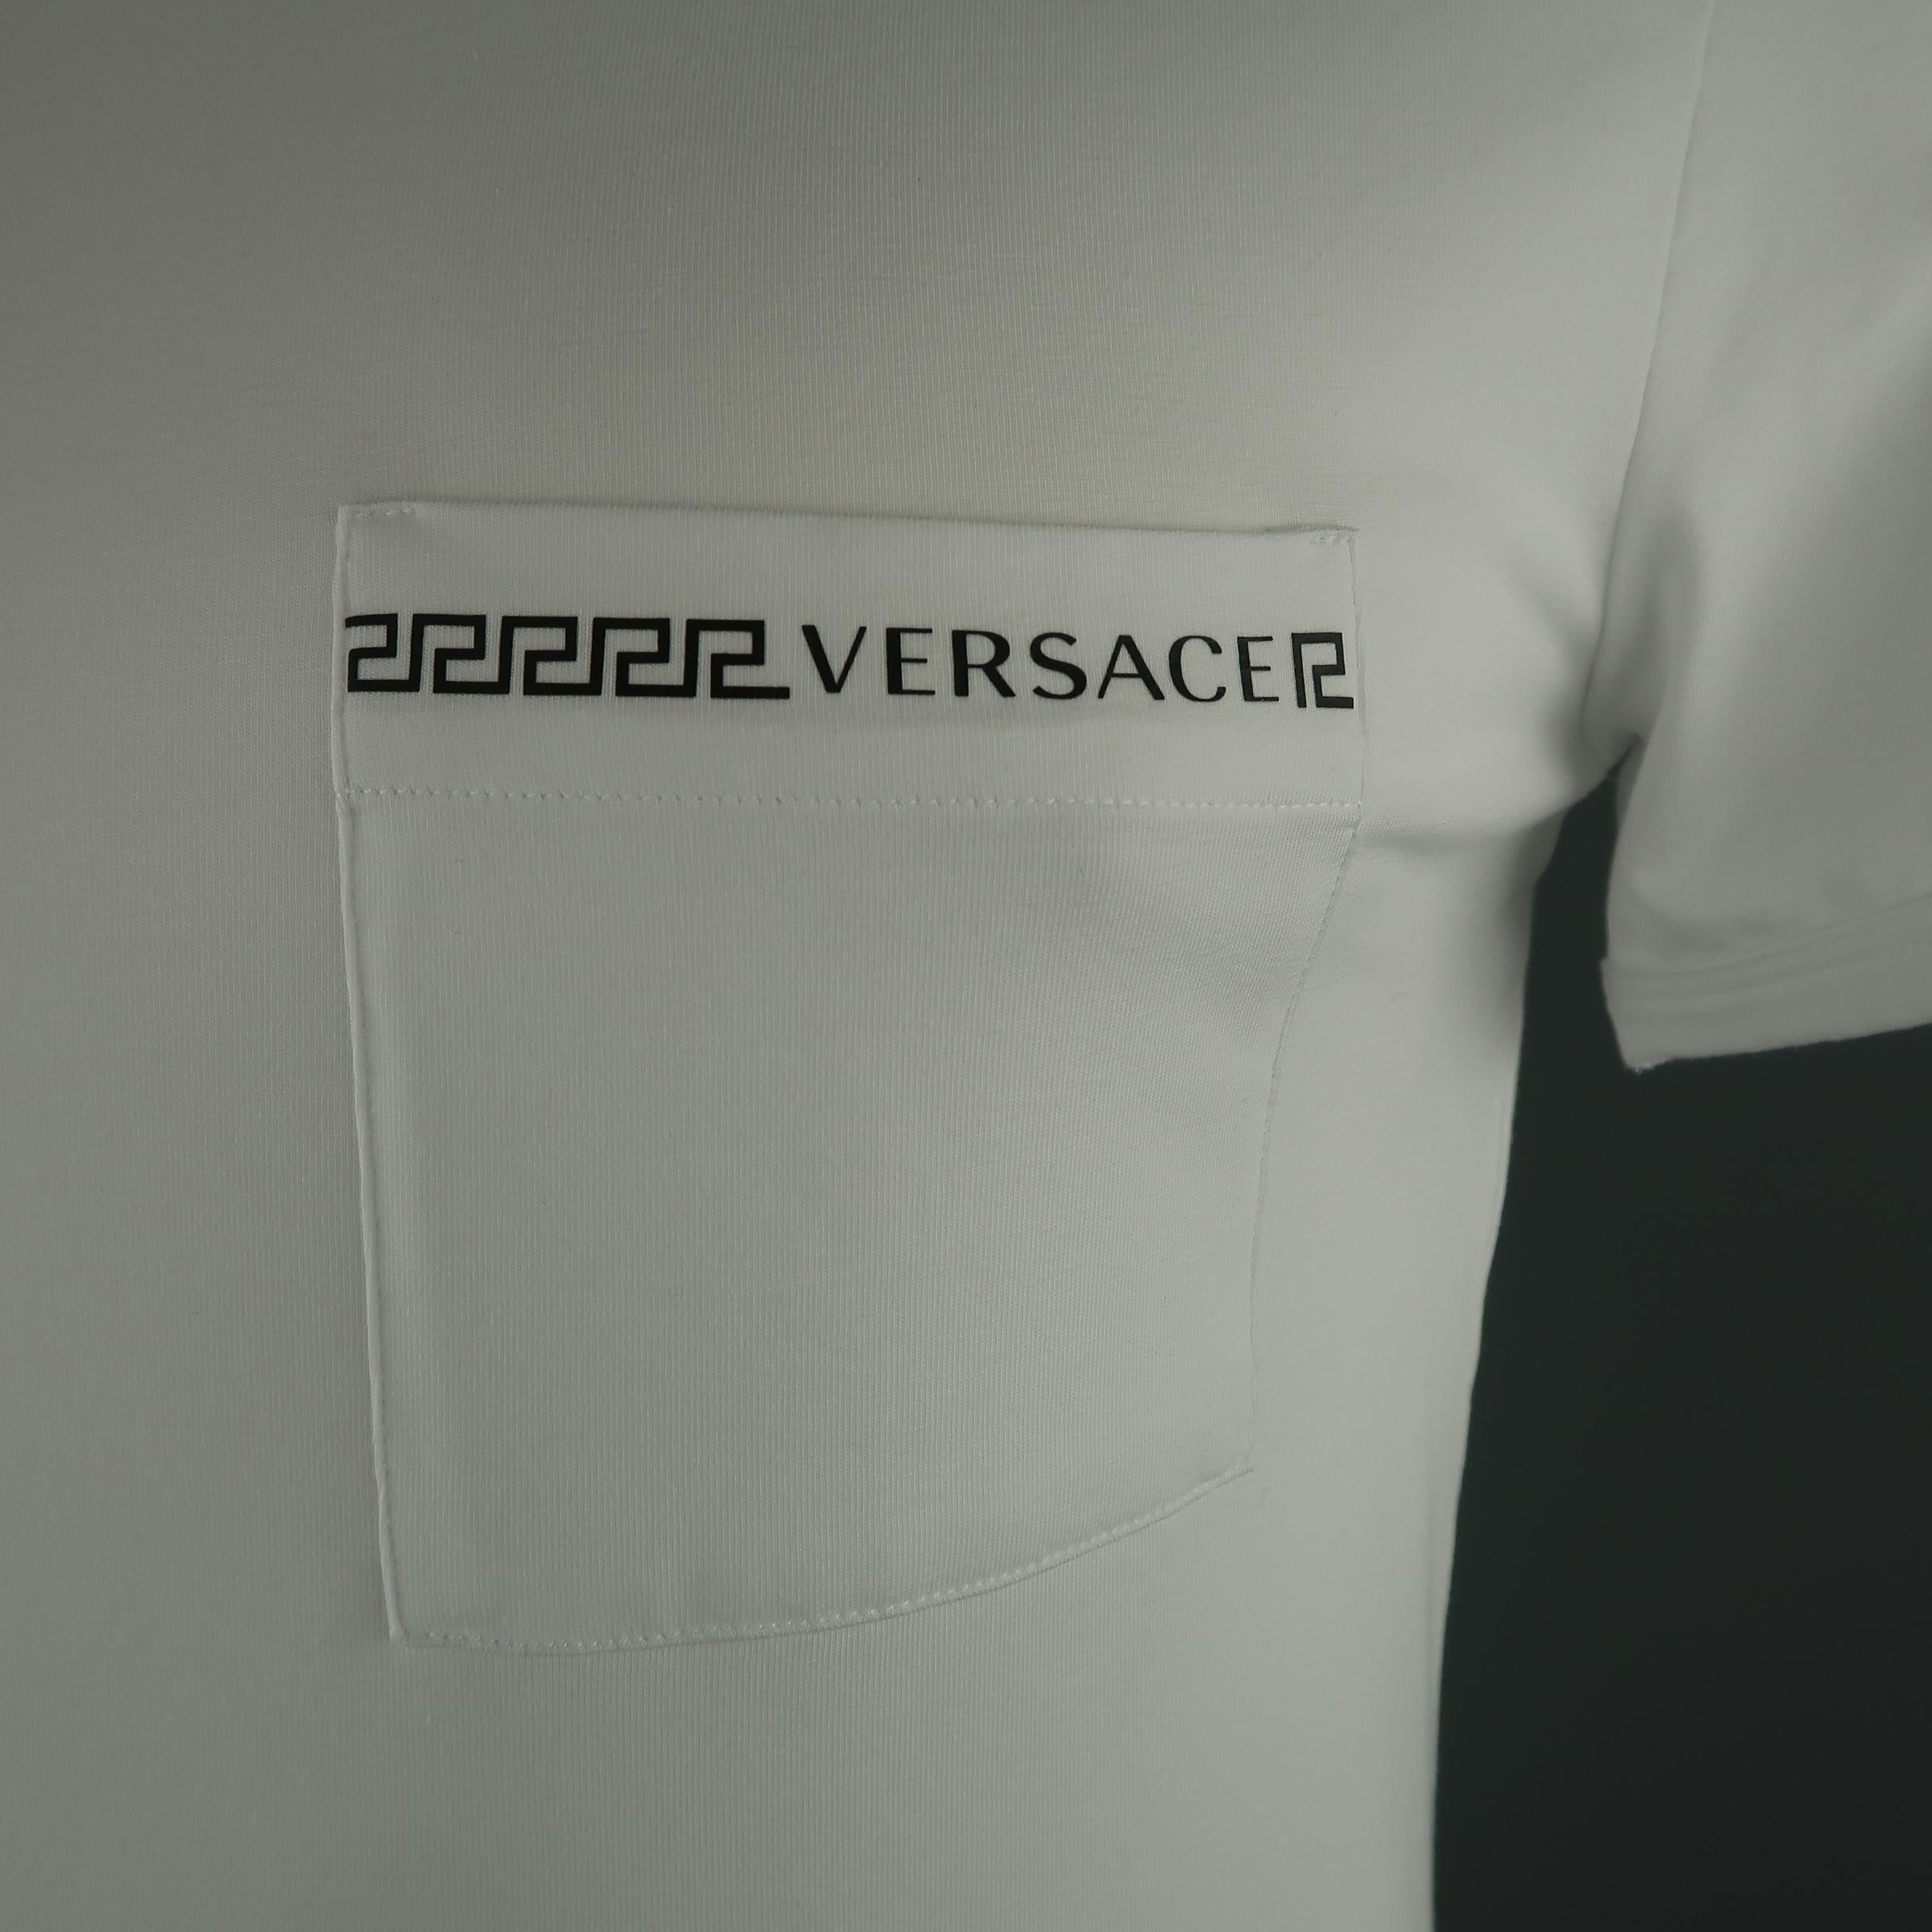 VERSACE classic T-shirt come in white cotton, with patch pocket on the chest, and crewneck. Presenting dust mark on the left shoulder.  
 
New with tags.
Marked: 6
 
Measurements:
 
Shoulder: 17 in.
Chest: 40 in.
Sleeve: 8 in.
Length: 28.5  in.